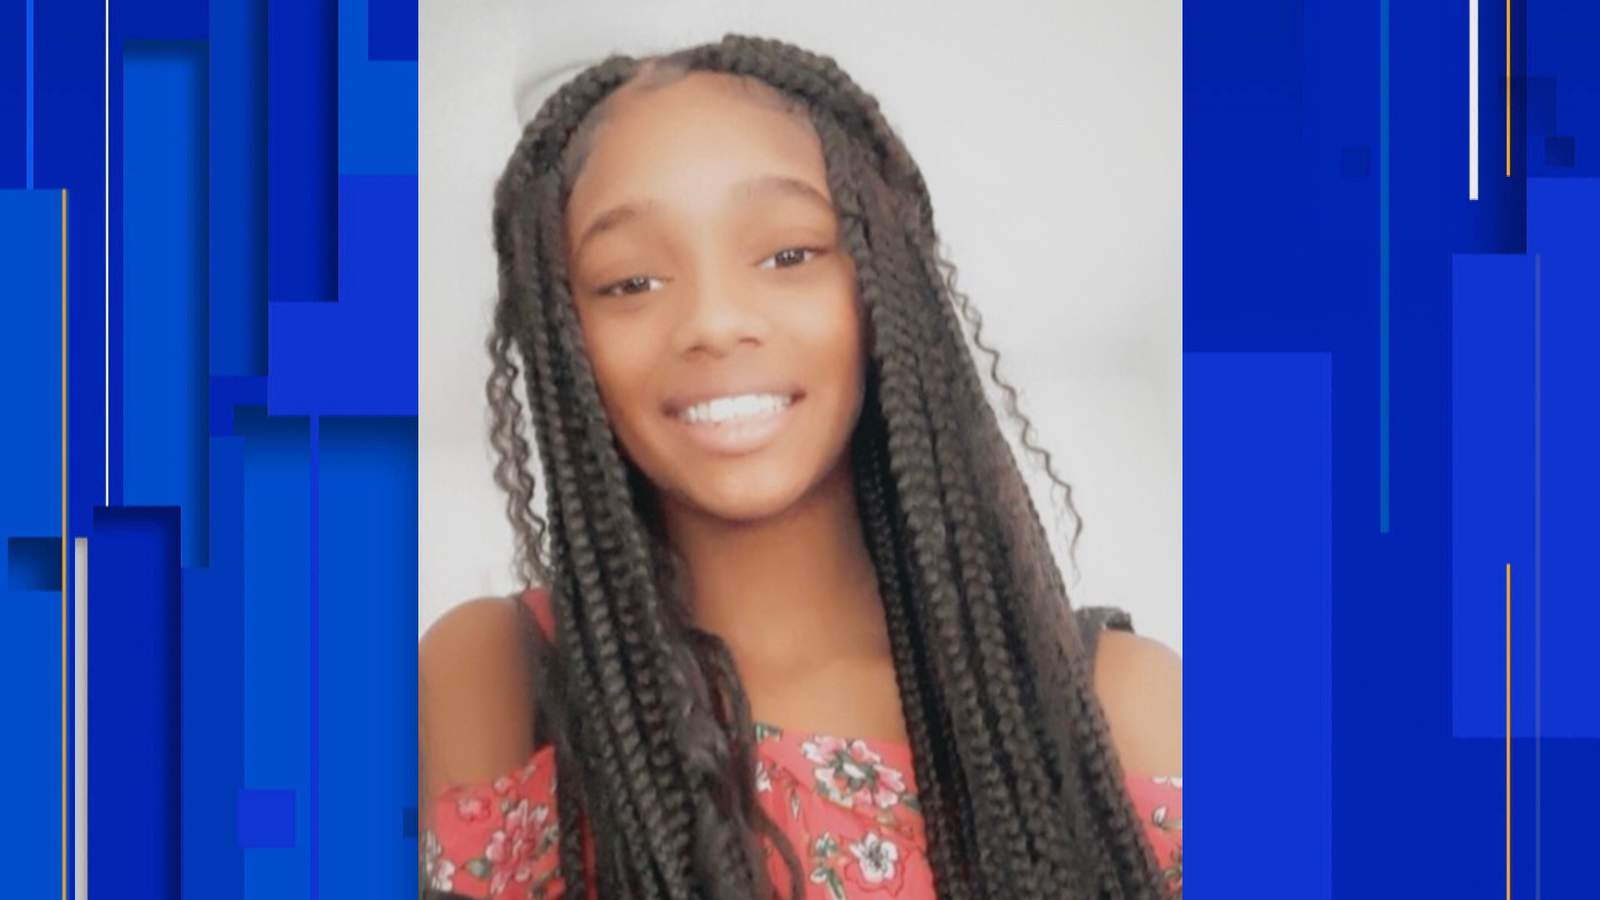 Detroit police want help finding missing 12-year-old girl